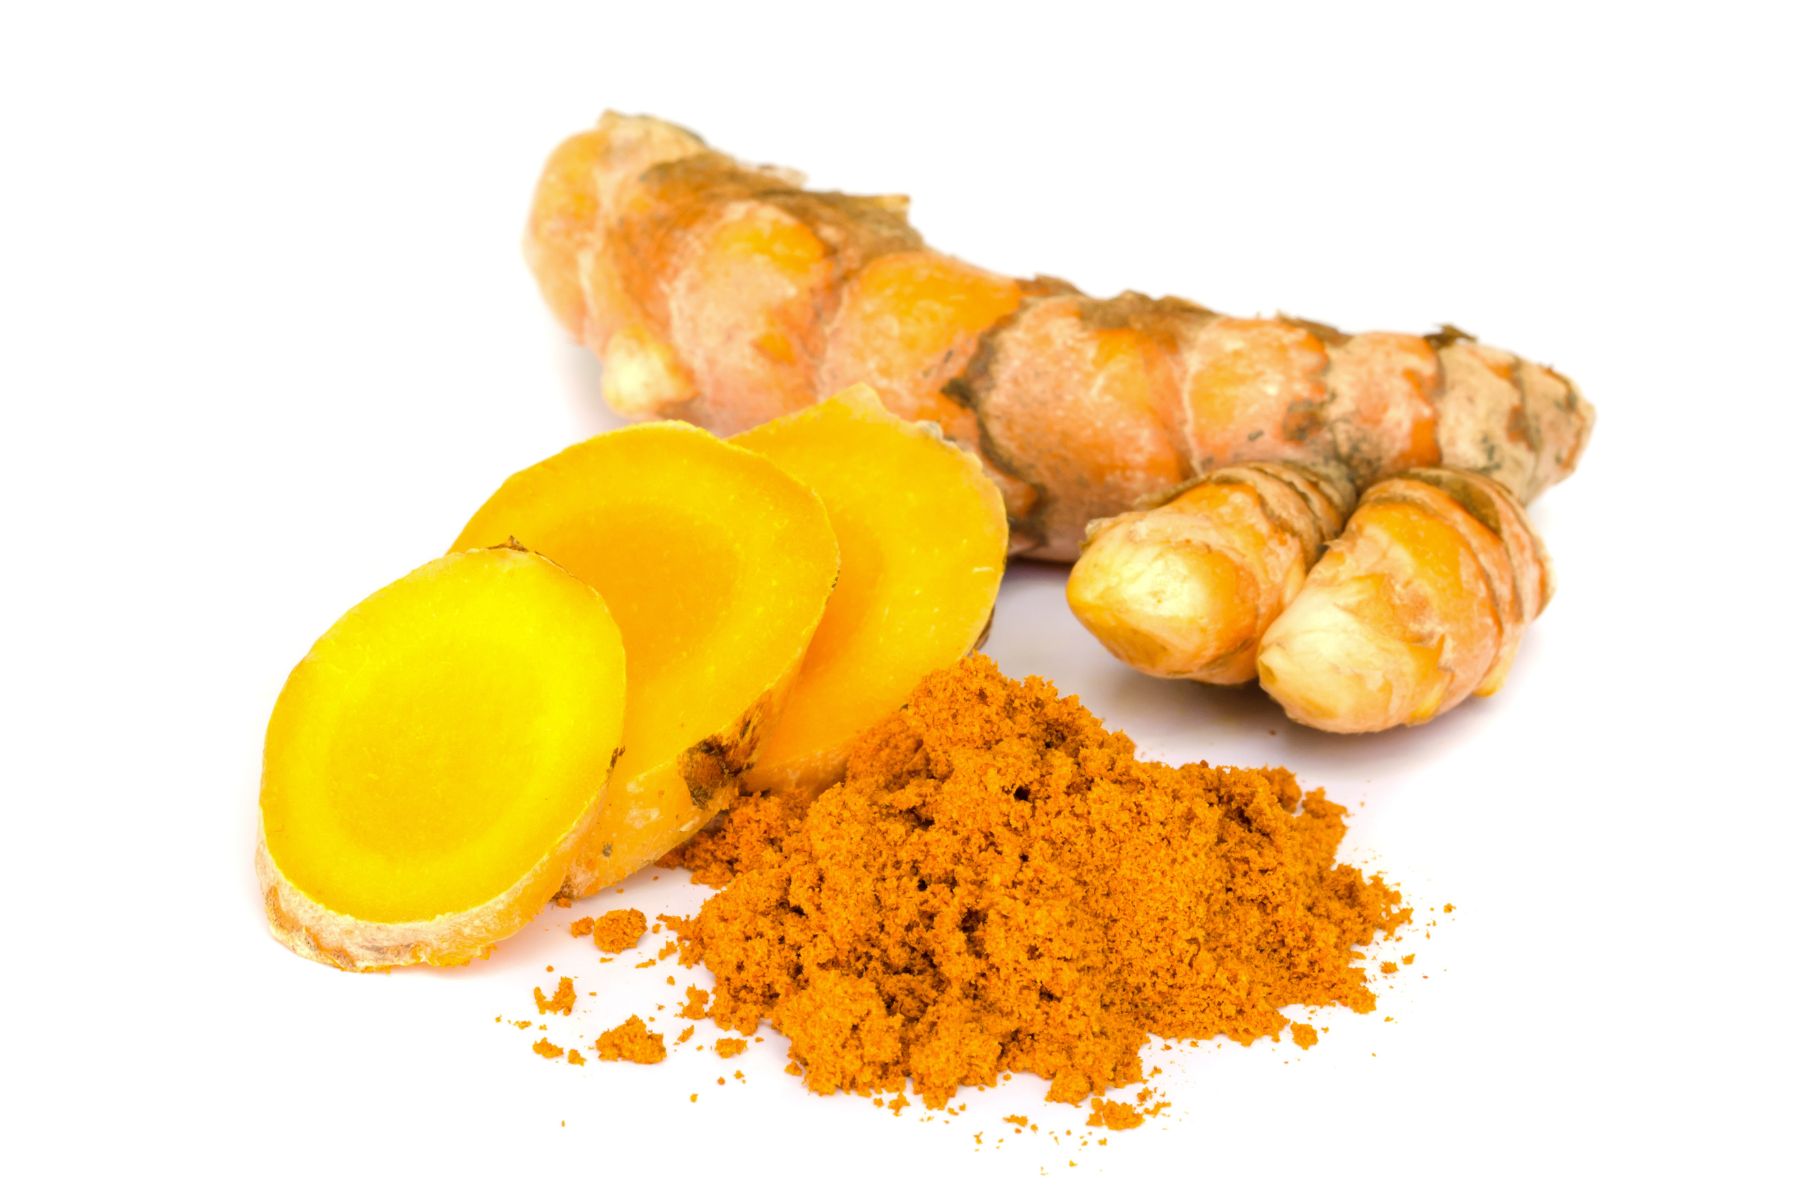 Fresh turmeric root, sliced pieces, and ground powder against a white background.